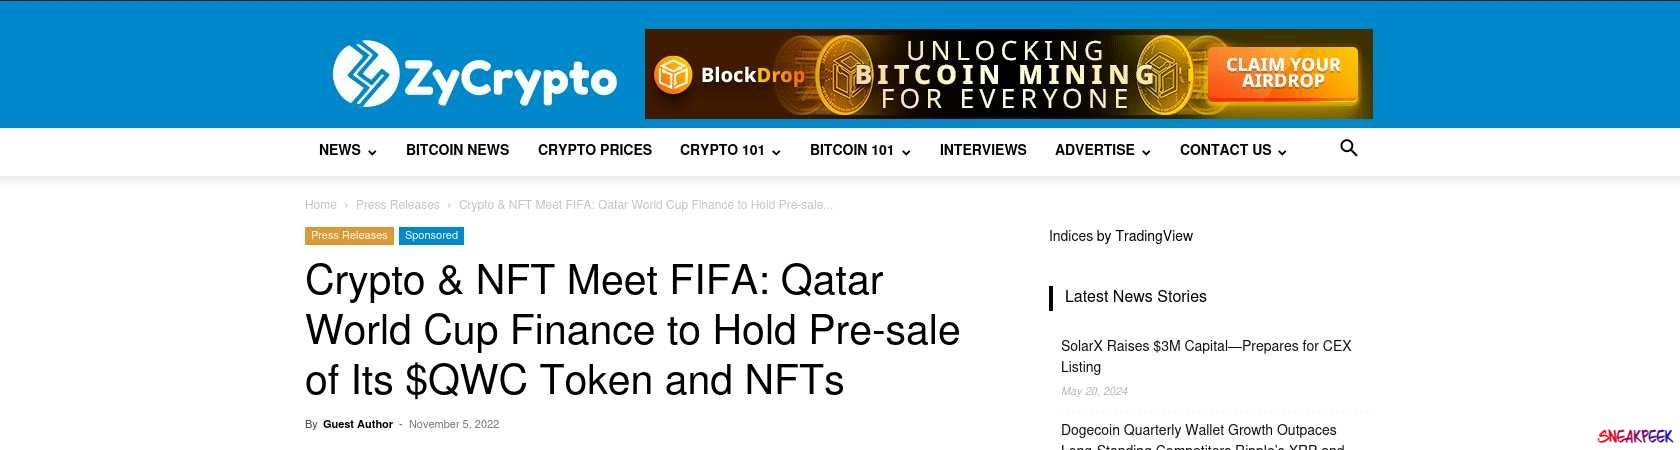 Read the full Article:  ⭲ Crypto & NFT Meet FIFA: Qatar World Cup Finance to Hold Pre-sale of Its $QWC Token and NFTs